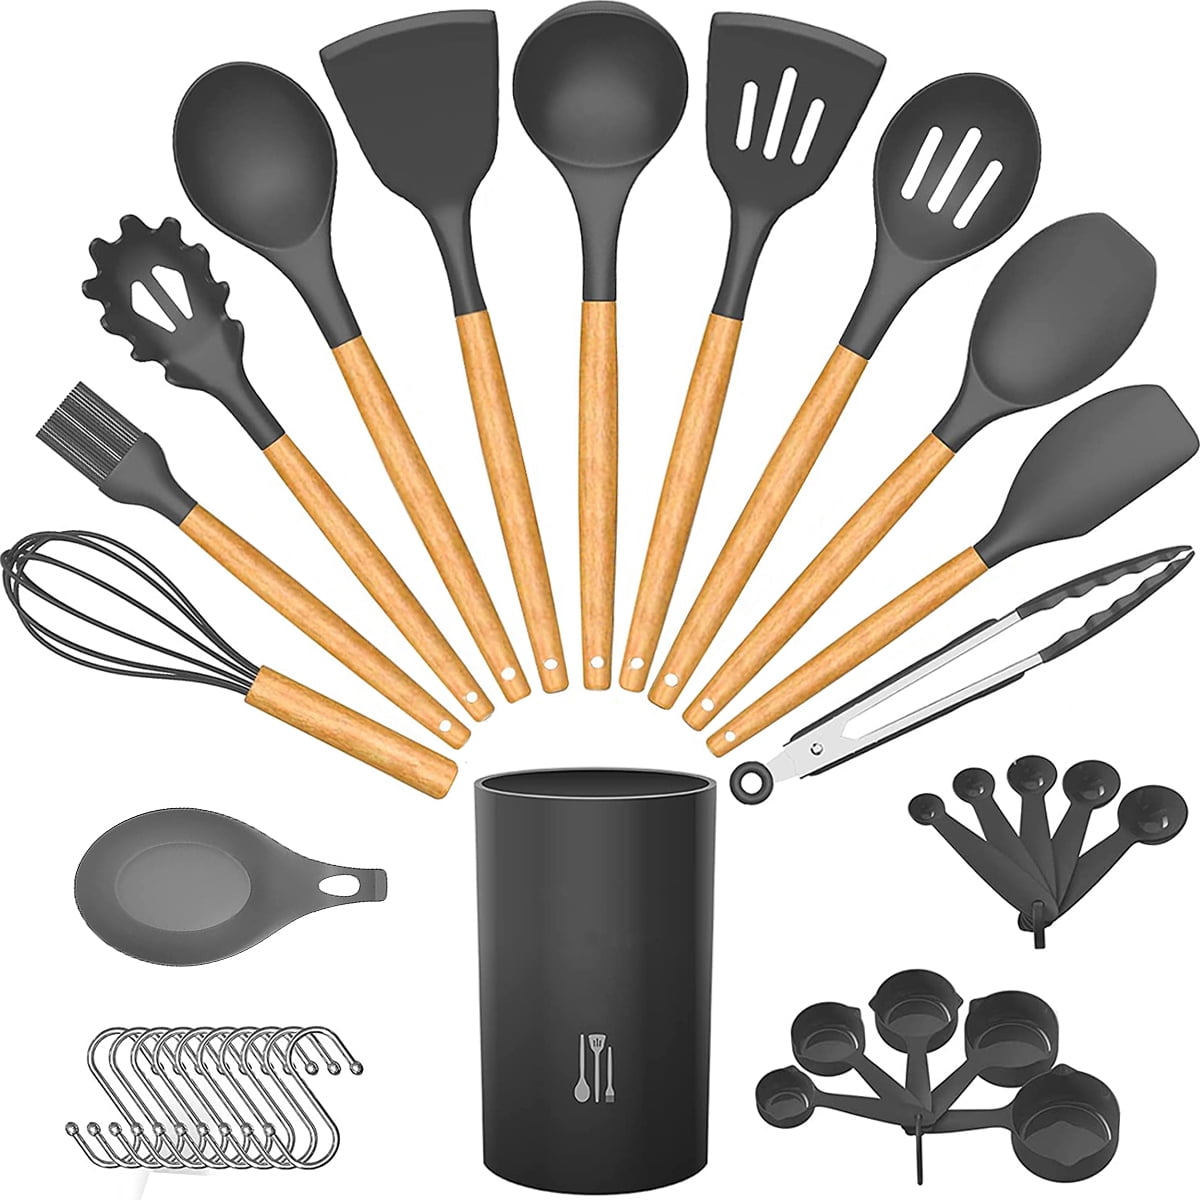 New 5pc Utensil Set With Holder Cooking Tools Accessories Kitchen Canteen Food 